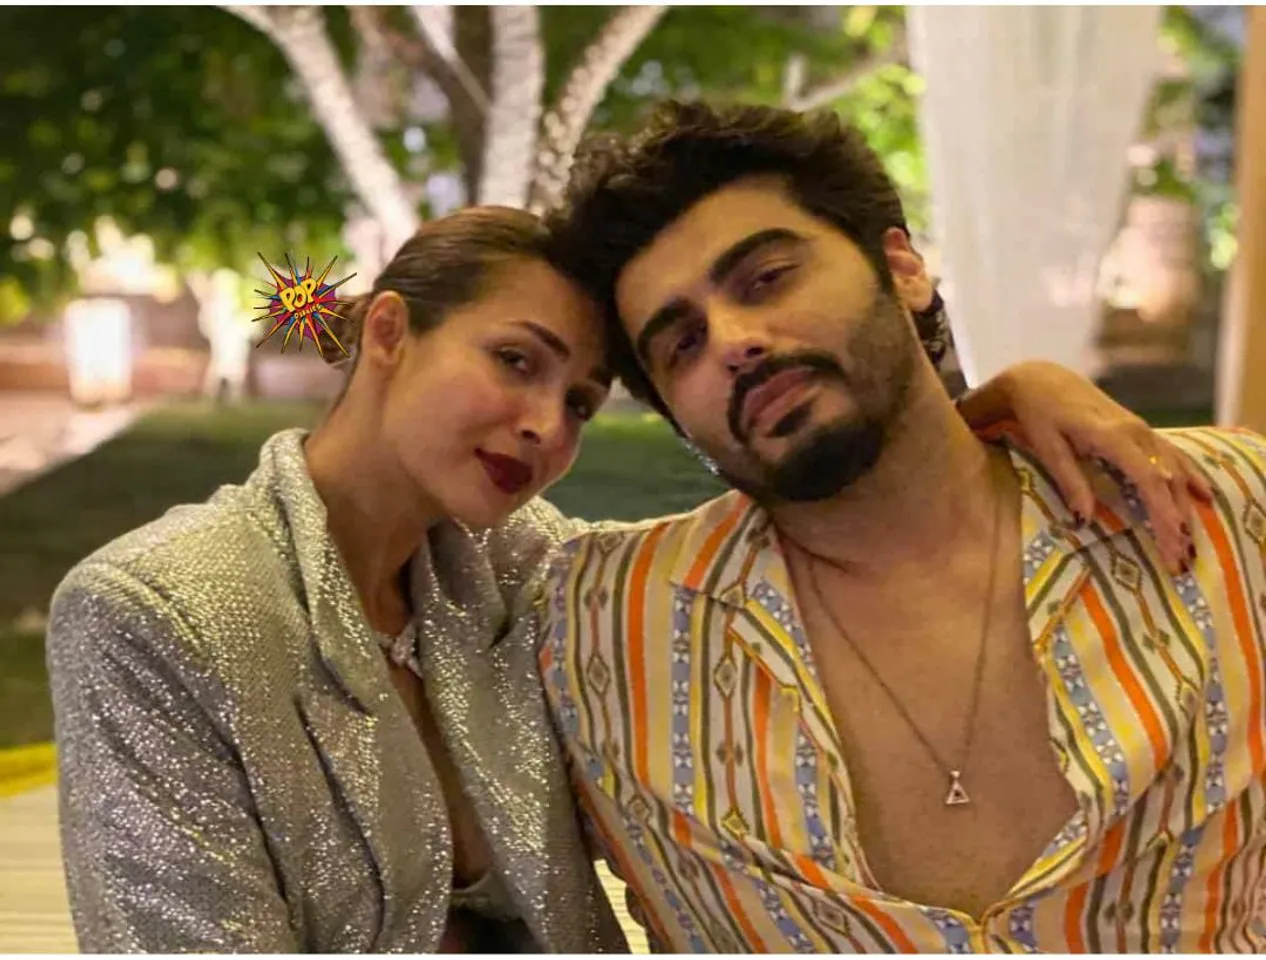 Arjun Kapoor being a boyfriend of dreams did this romantic element for Malaika Arora which painted the Maldives red